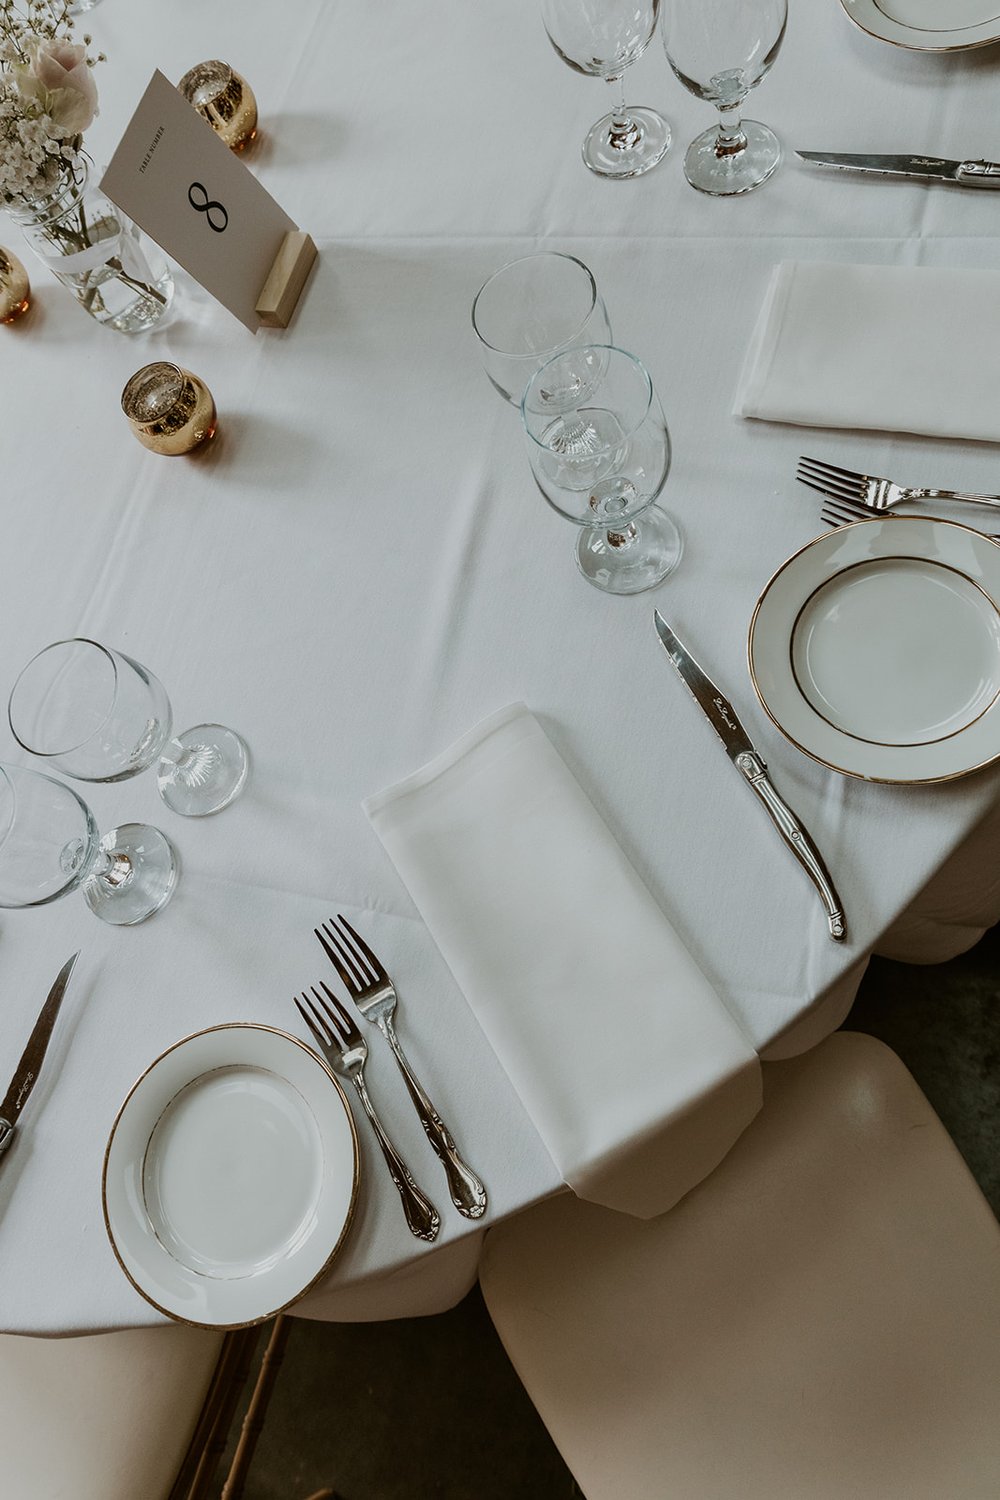 Simple tasteful white and silver table setting with touches of gold.